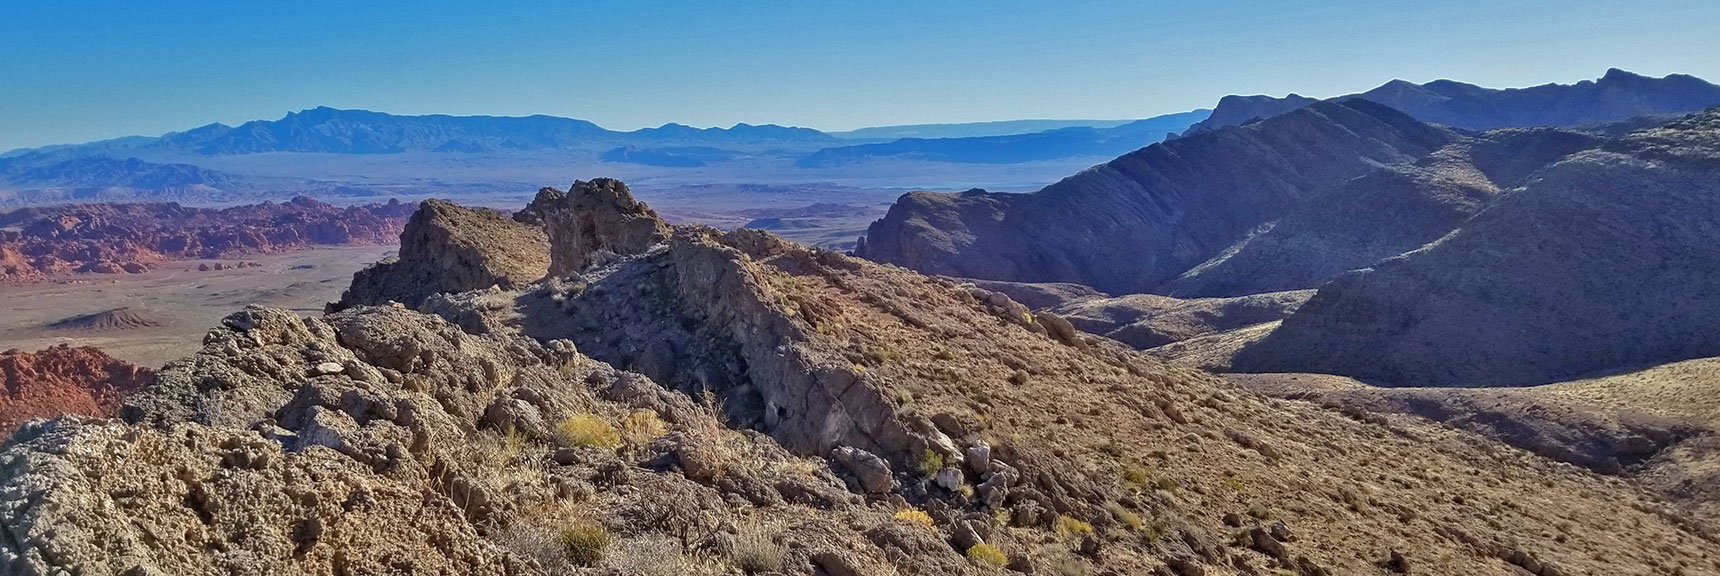 View Over the Cliff on the Second Northern Ridge System in the Muddy Mountains Wilderness, Nevada